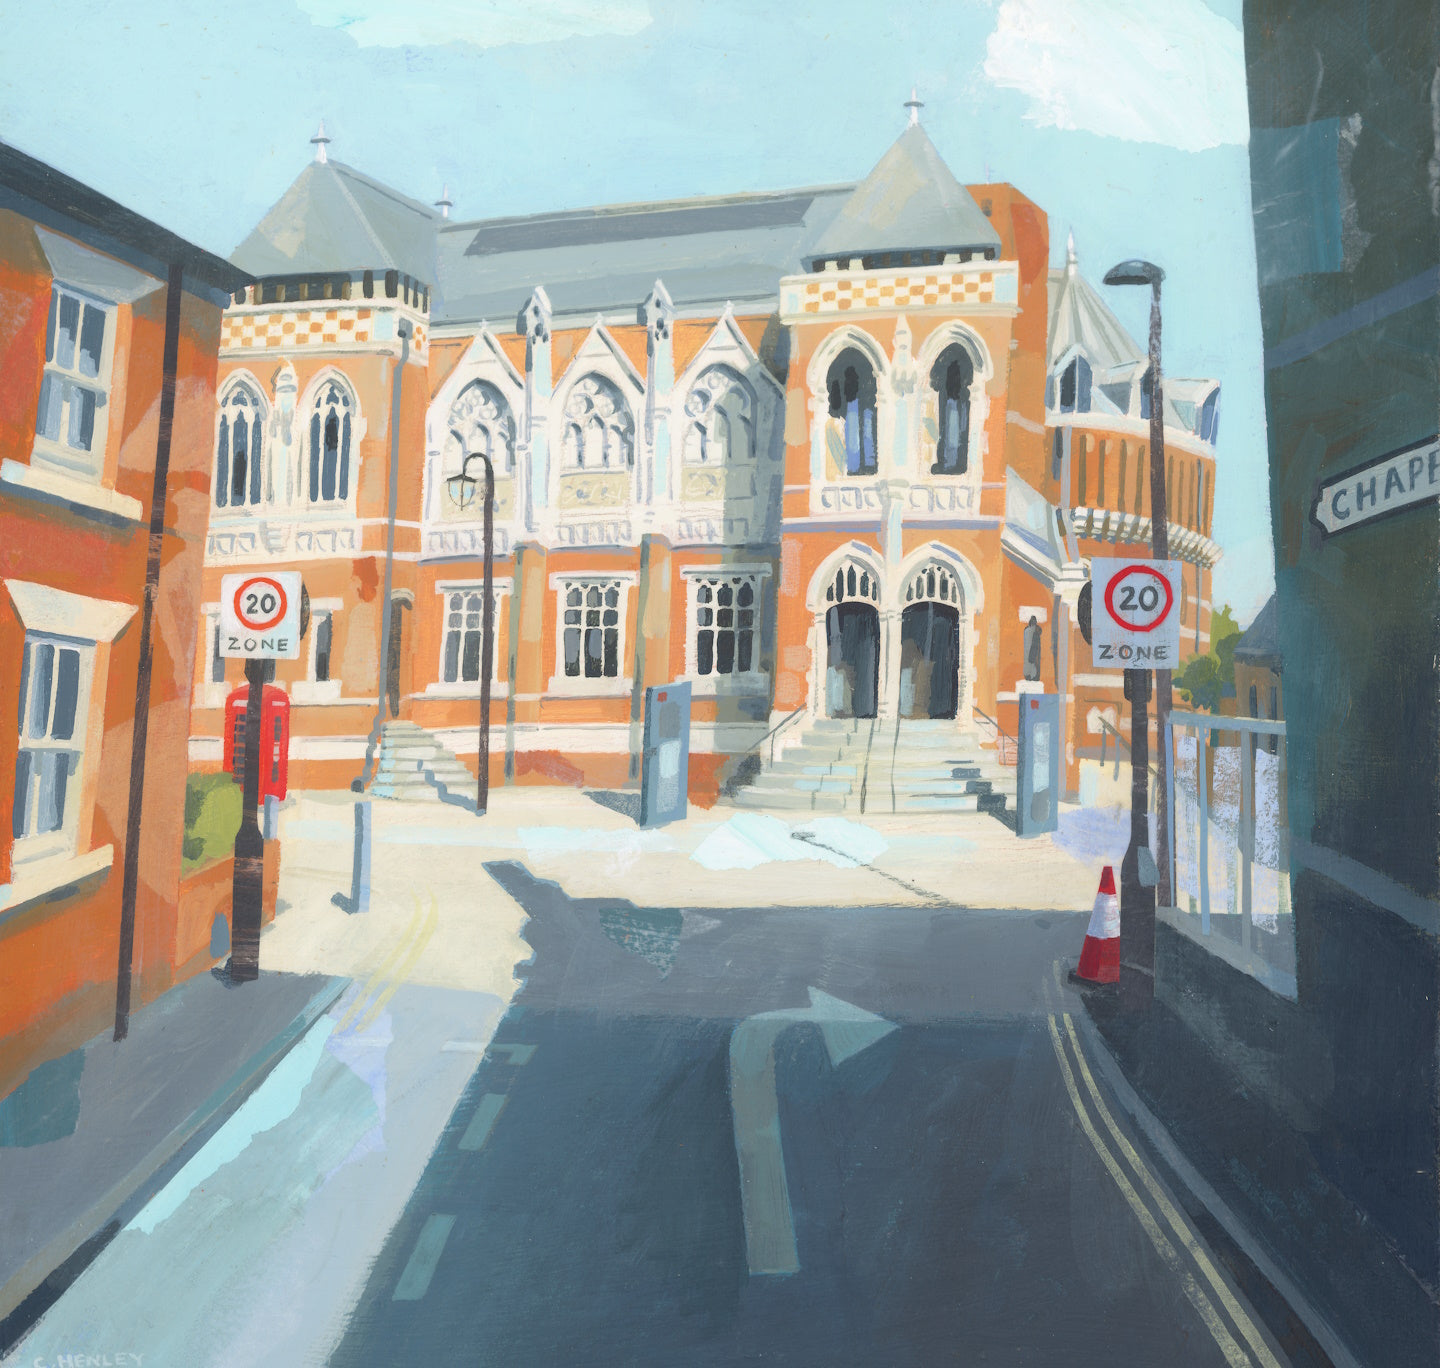 Greeting Card: Swan Theatre from Chapel Lane